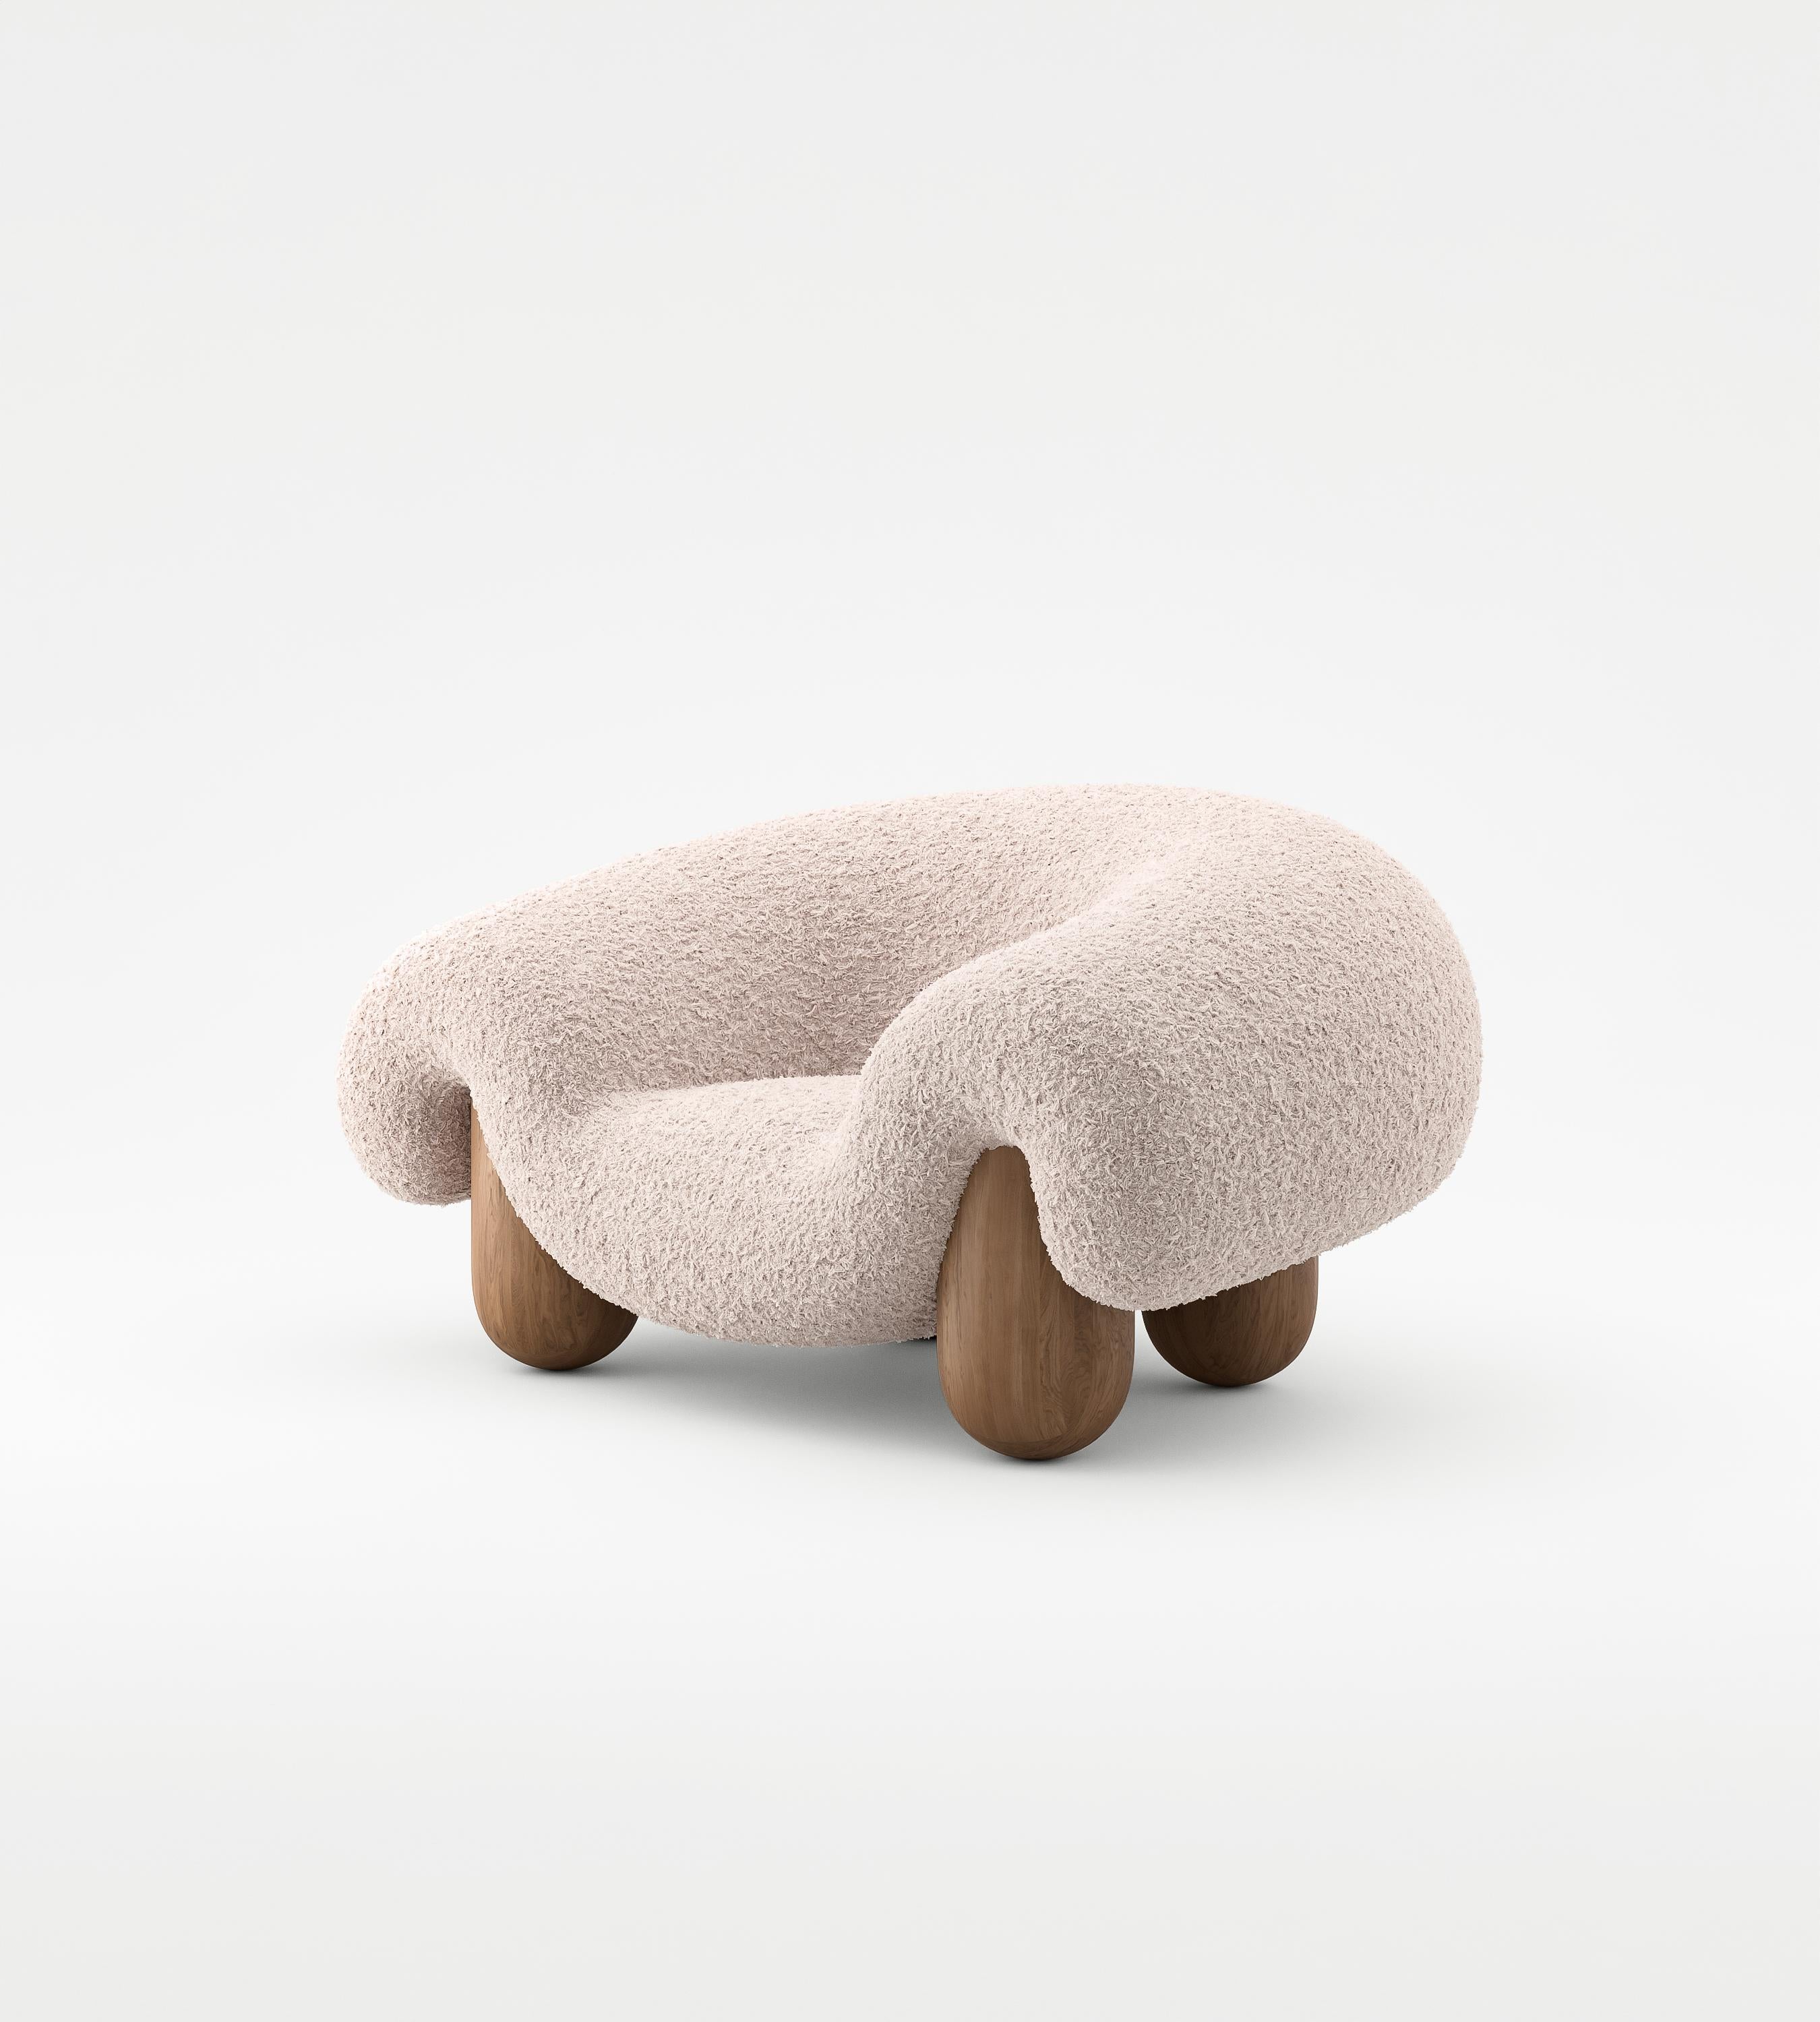 Lamb Chair by NUMO
Dimensions: D 116 x W 119 x H 84 cm
Materials: Faux Lamb Fur, Wood
Customizable Size. Please contact us.

 Vladimir Naumov is a professional architect, designer and artist.

While designing the furniture he tries to reach the